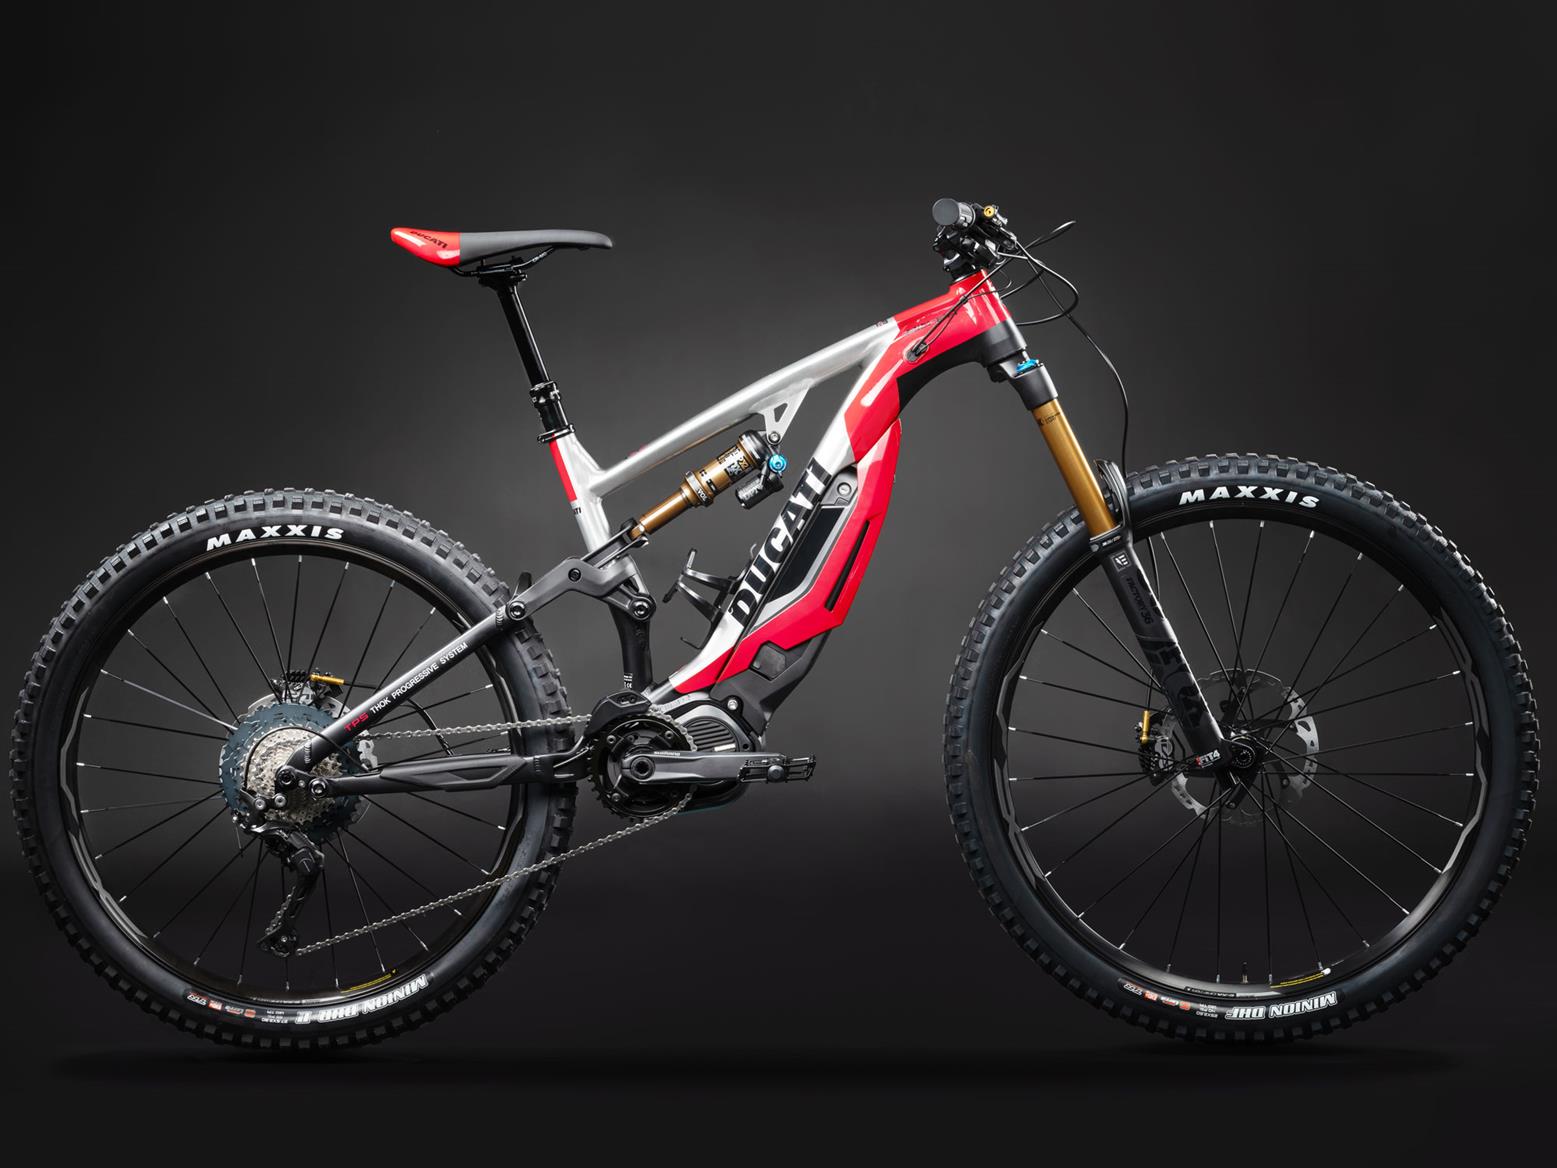 Troy Bayliss Gives Ducati Mig Rr E Mtb Electric Mountain Bike Approval